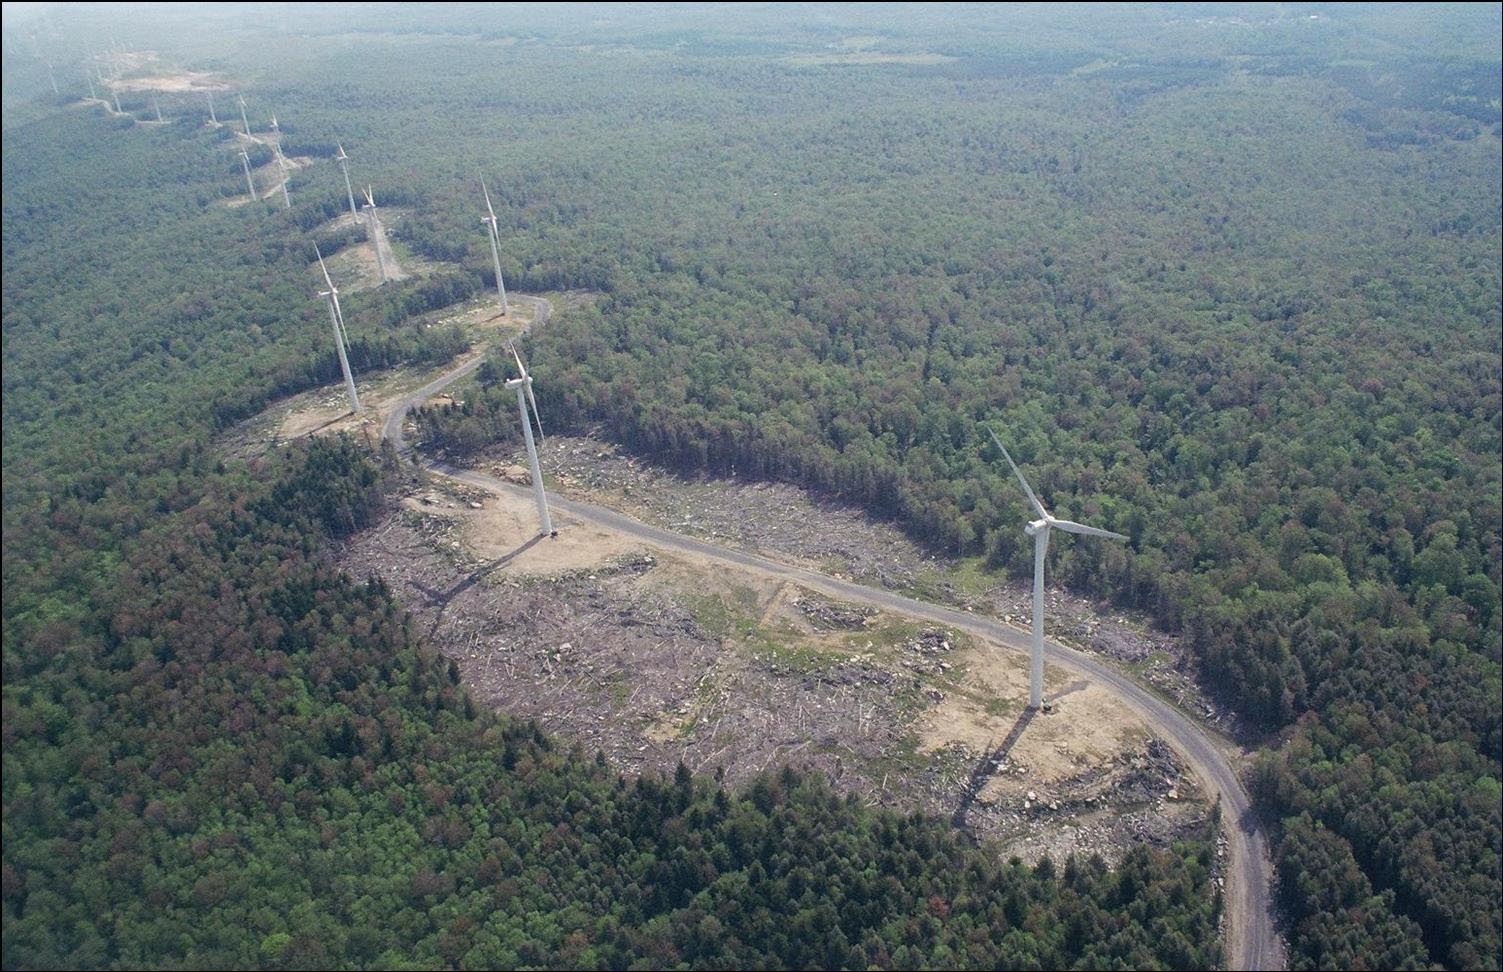 An aerial view of the 44-turbine Mountaineer wind energy project with the cleared out trees around each Turbine